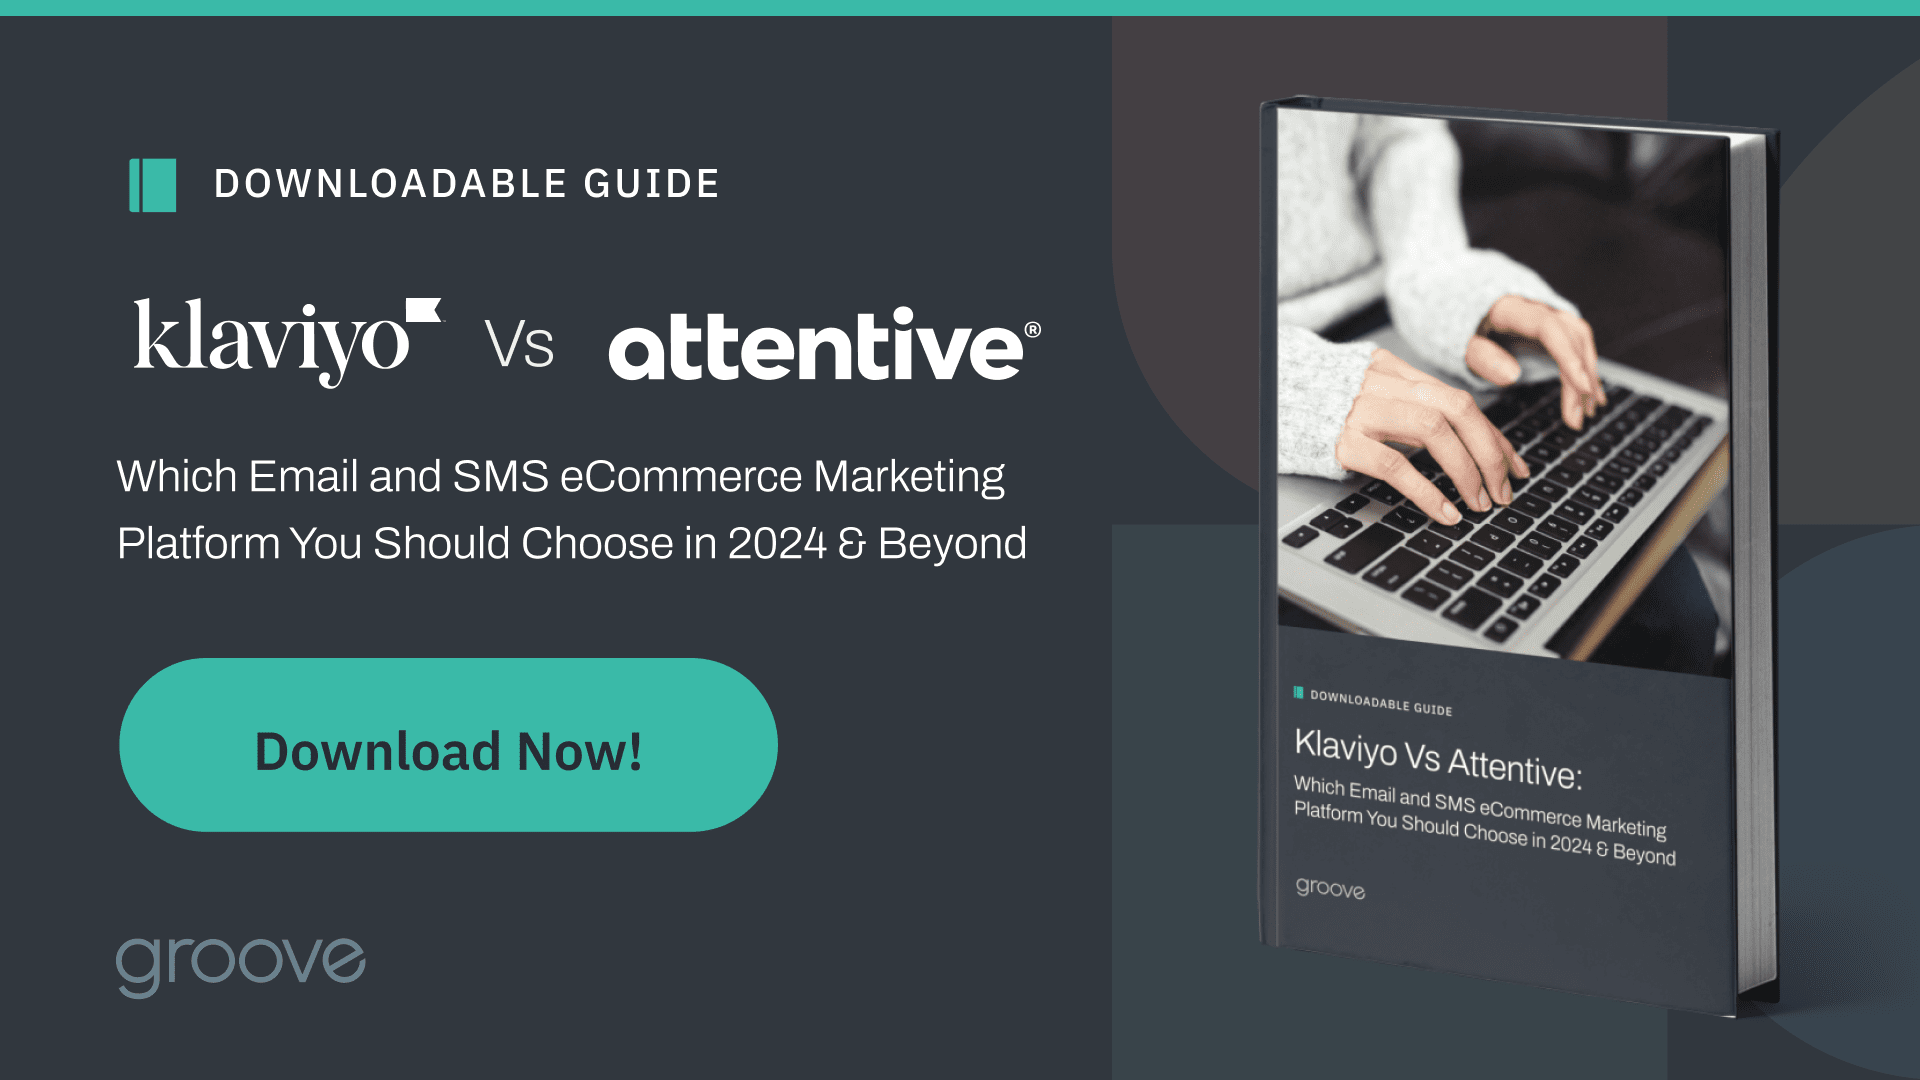 Klaviyo Vs Attentive: Which Email and SMS eCommerce Marketing Platform You Should Choose in 2024 & Beyond